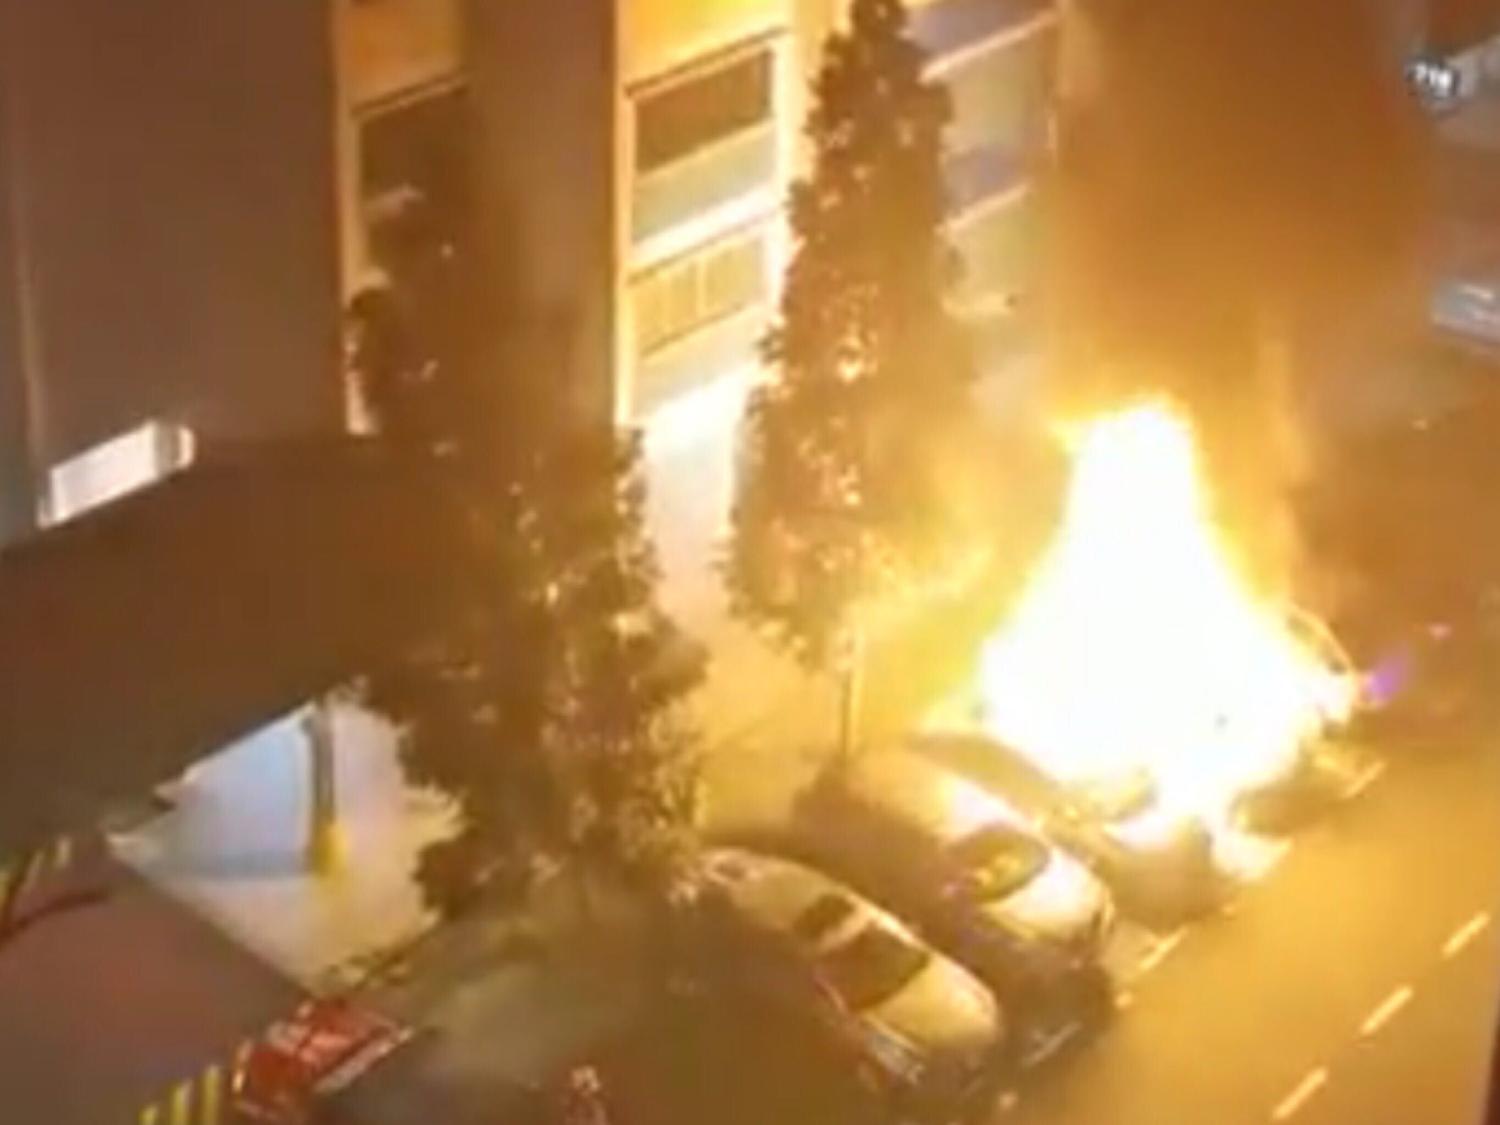 A man was taken to the Singapore General Hospital for burn injuries and four vehicles were damaged in a blaze at a public car park.